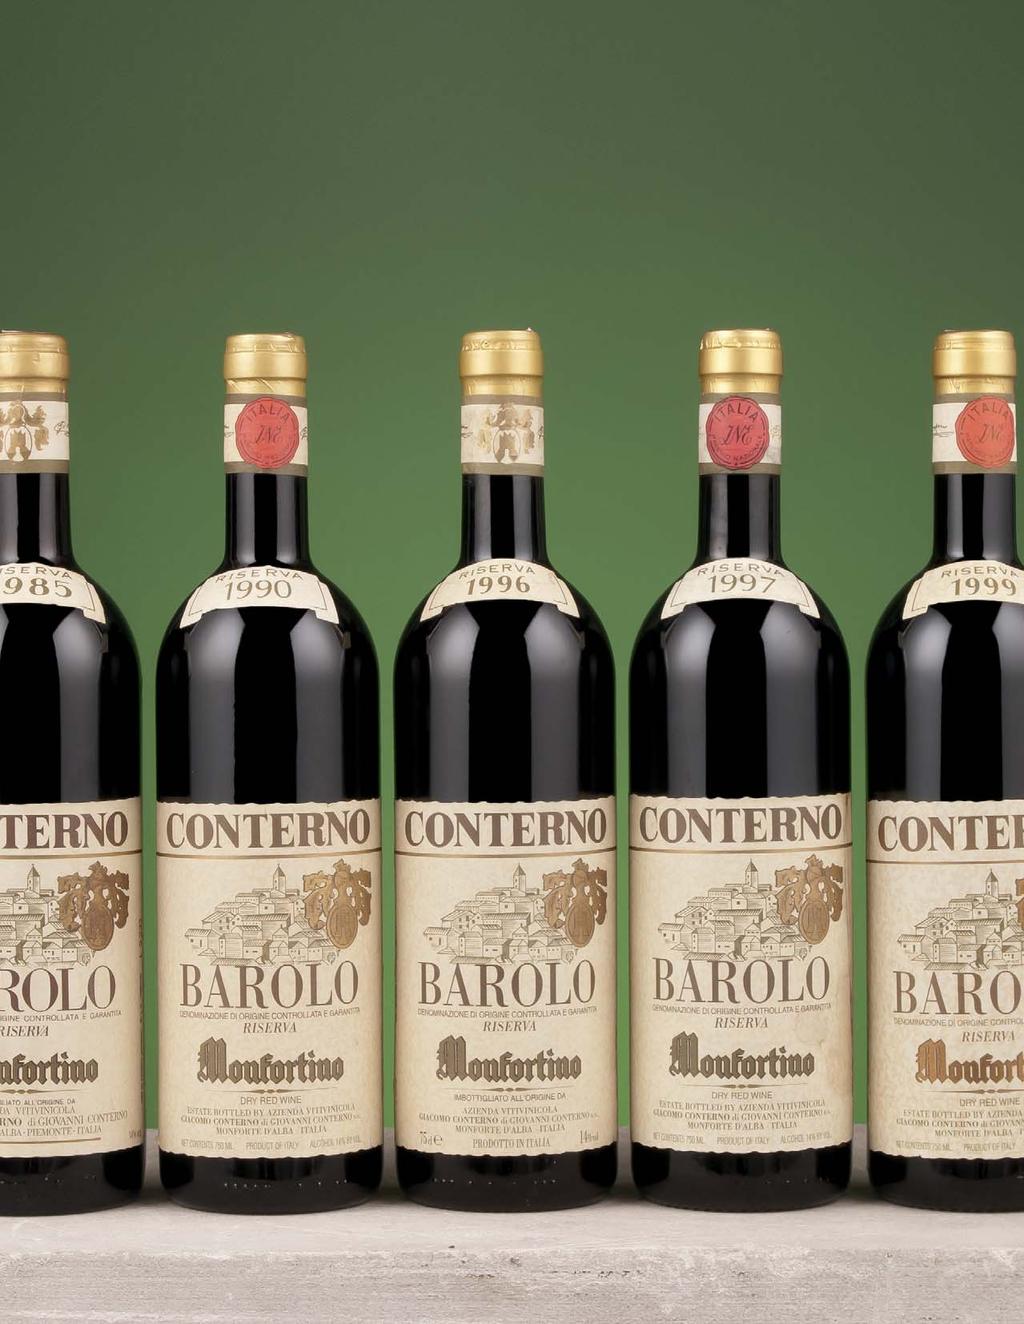 FINE BAROLO Available 24 Hours a Day on our Outstanding Retail Website Exceptional Service from our Team of Experts State of the Art Website with Real-Time Inventory In Stock, Fully Inspected and